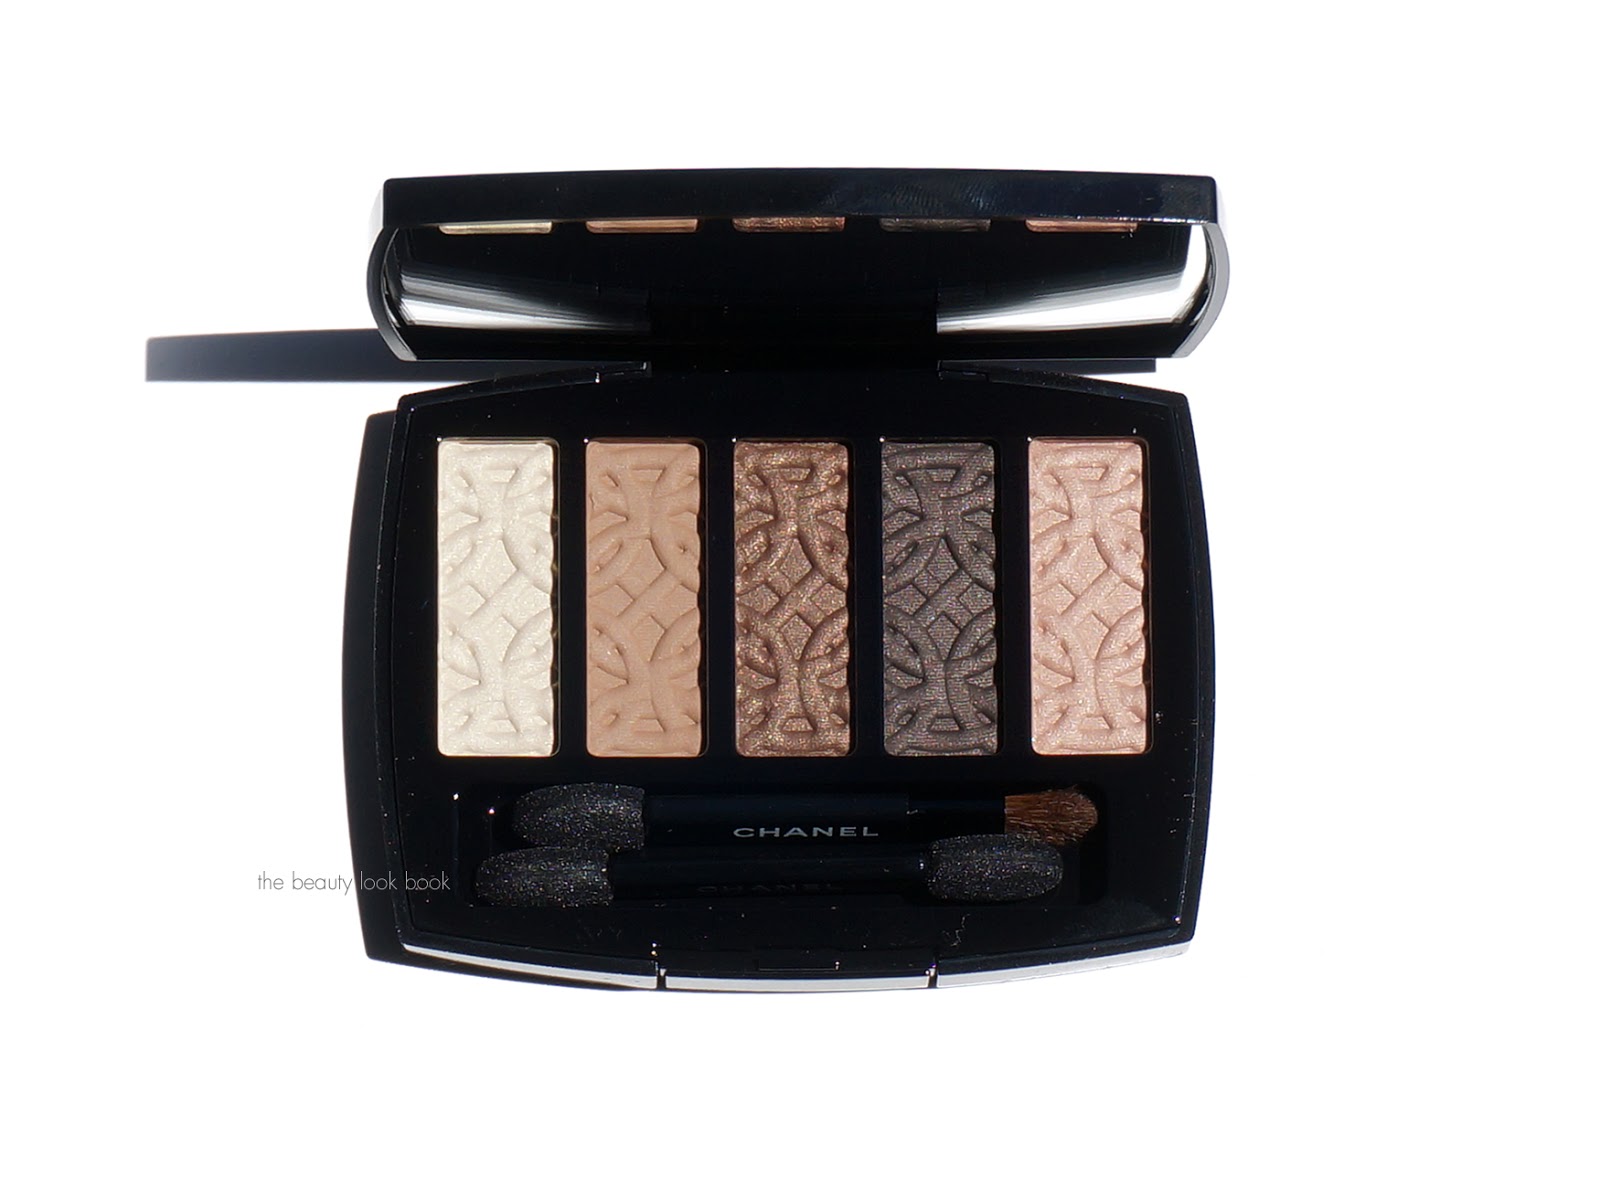 Chanel Pearl River Ombres Matelassees Eyeshadow Palette Review, Photos,  Swatches